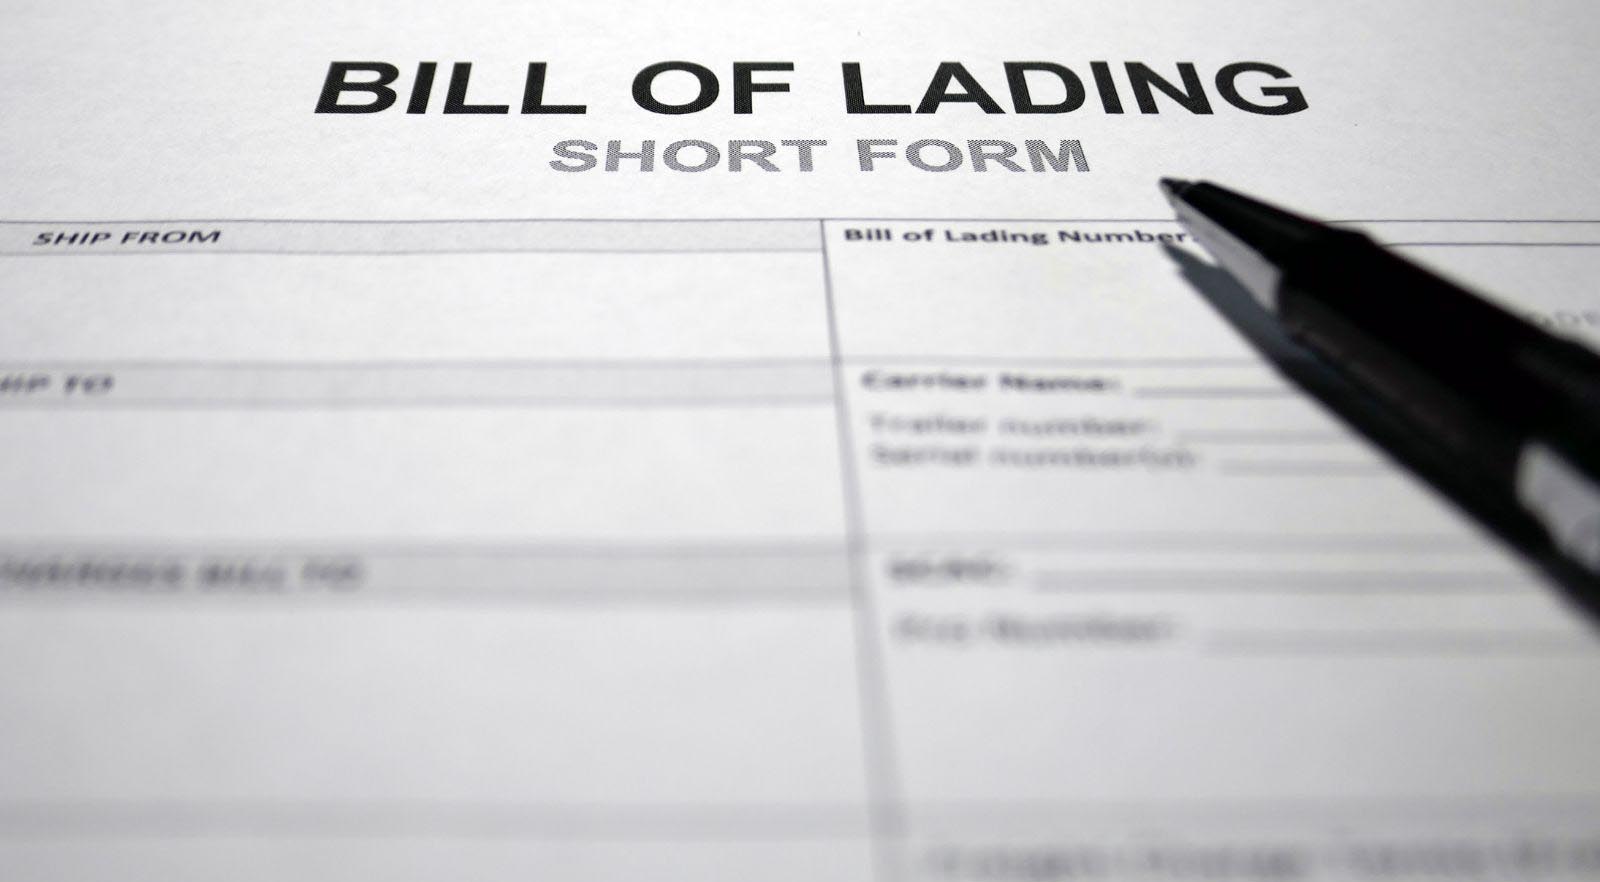 The Different Types of Bills of Lading